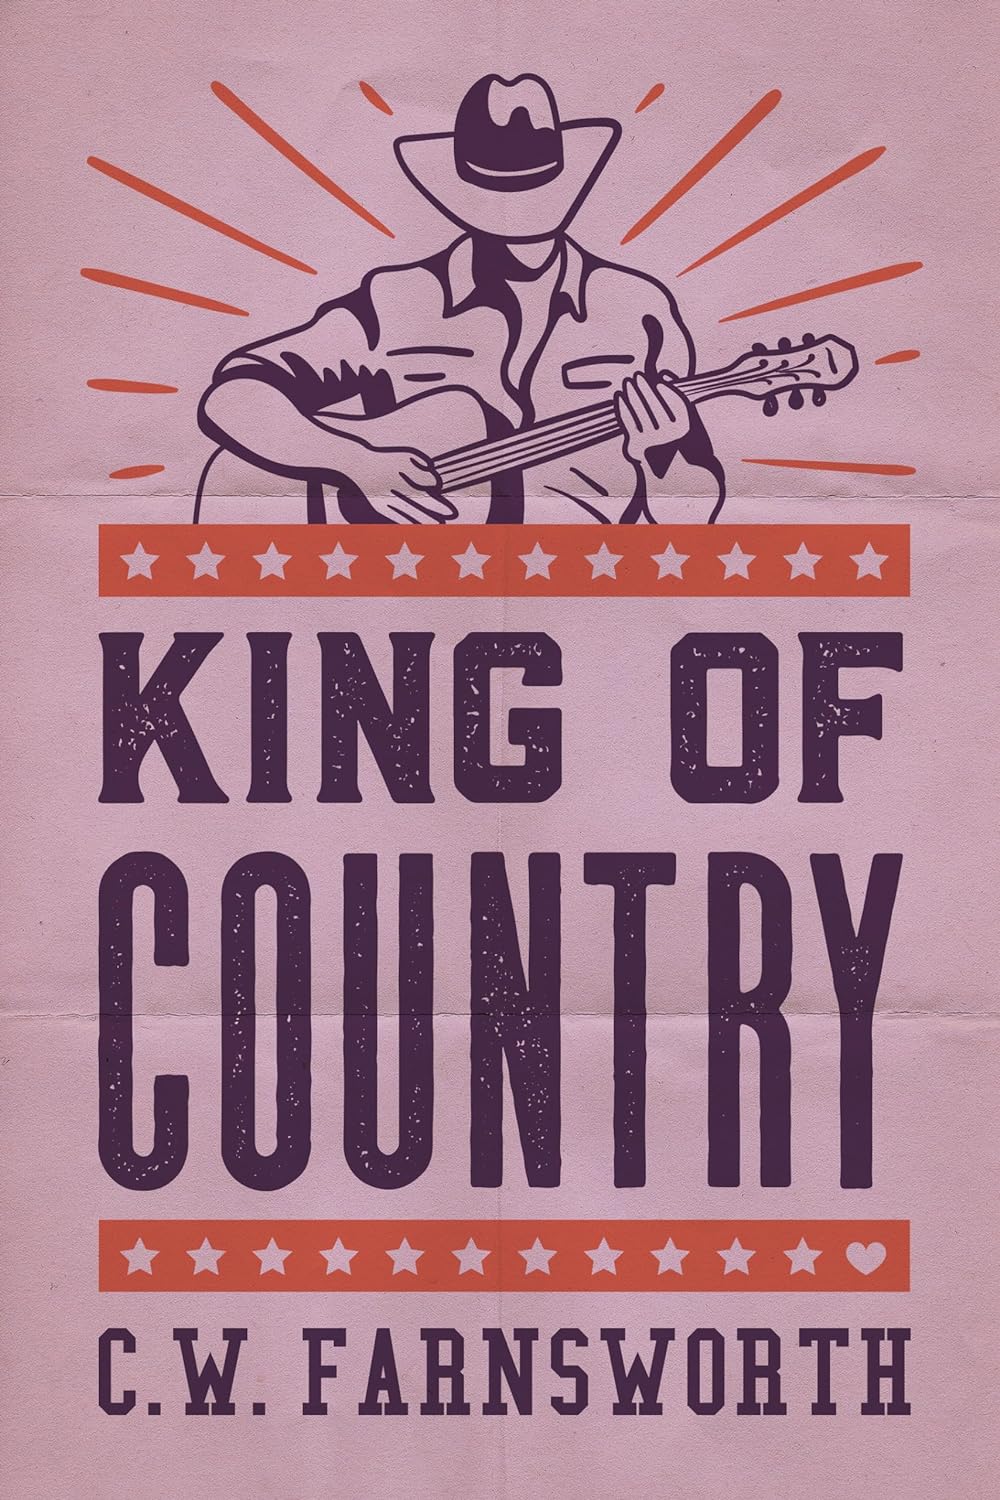 King of Country - C.W. Farnsworth